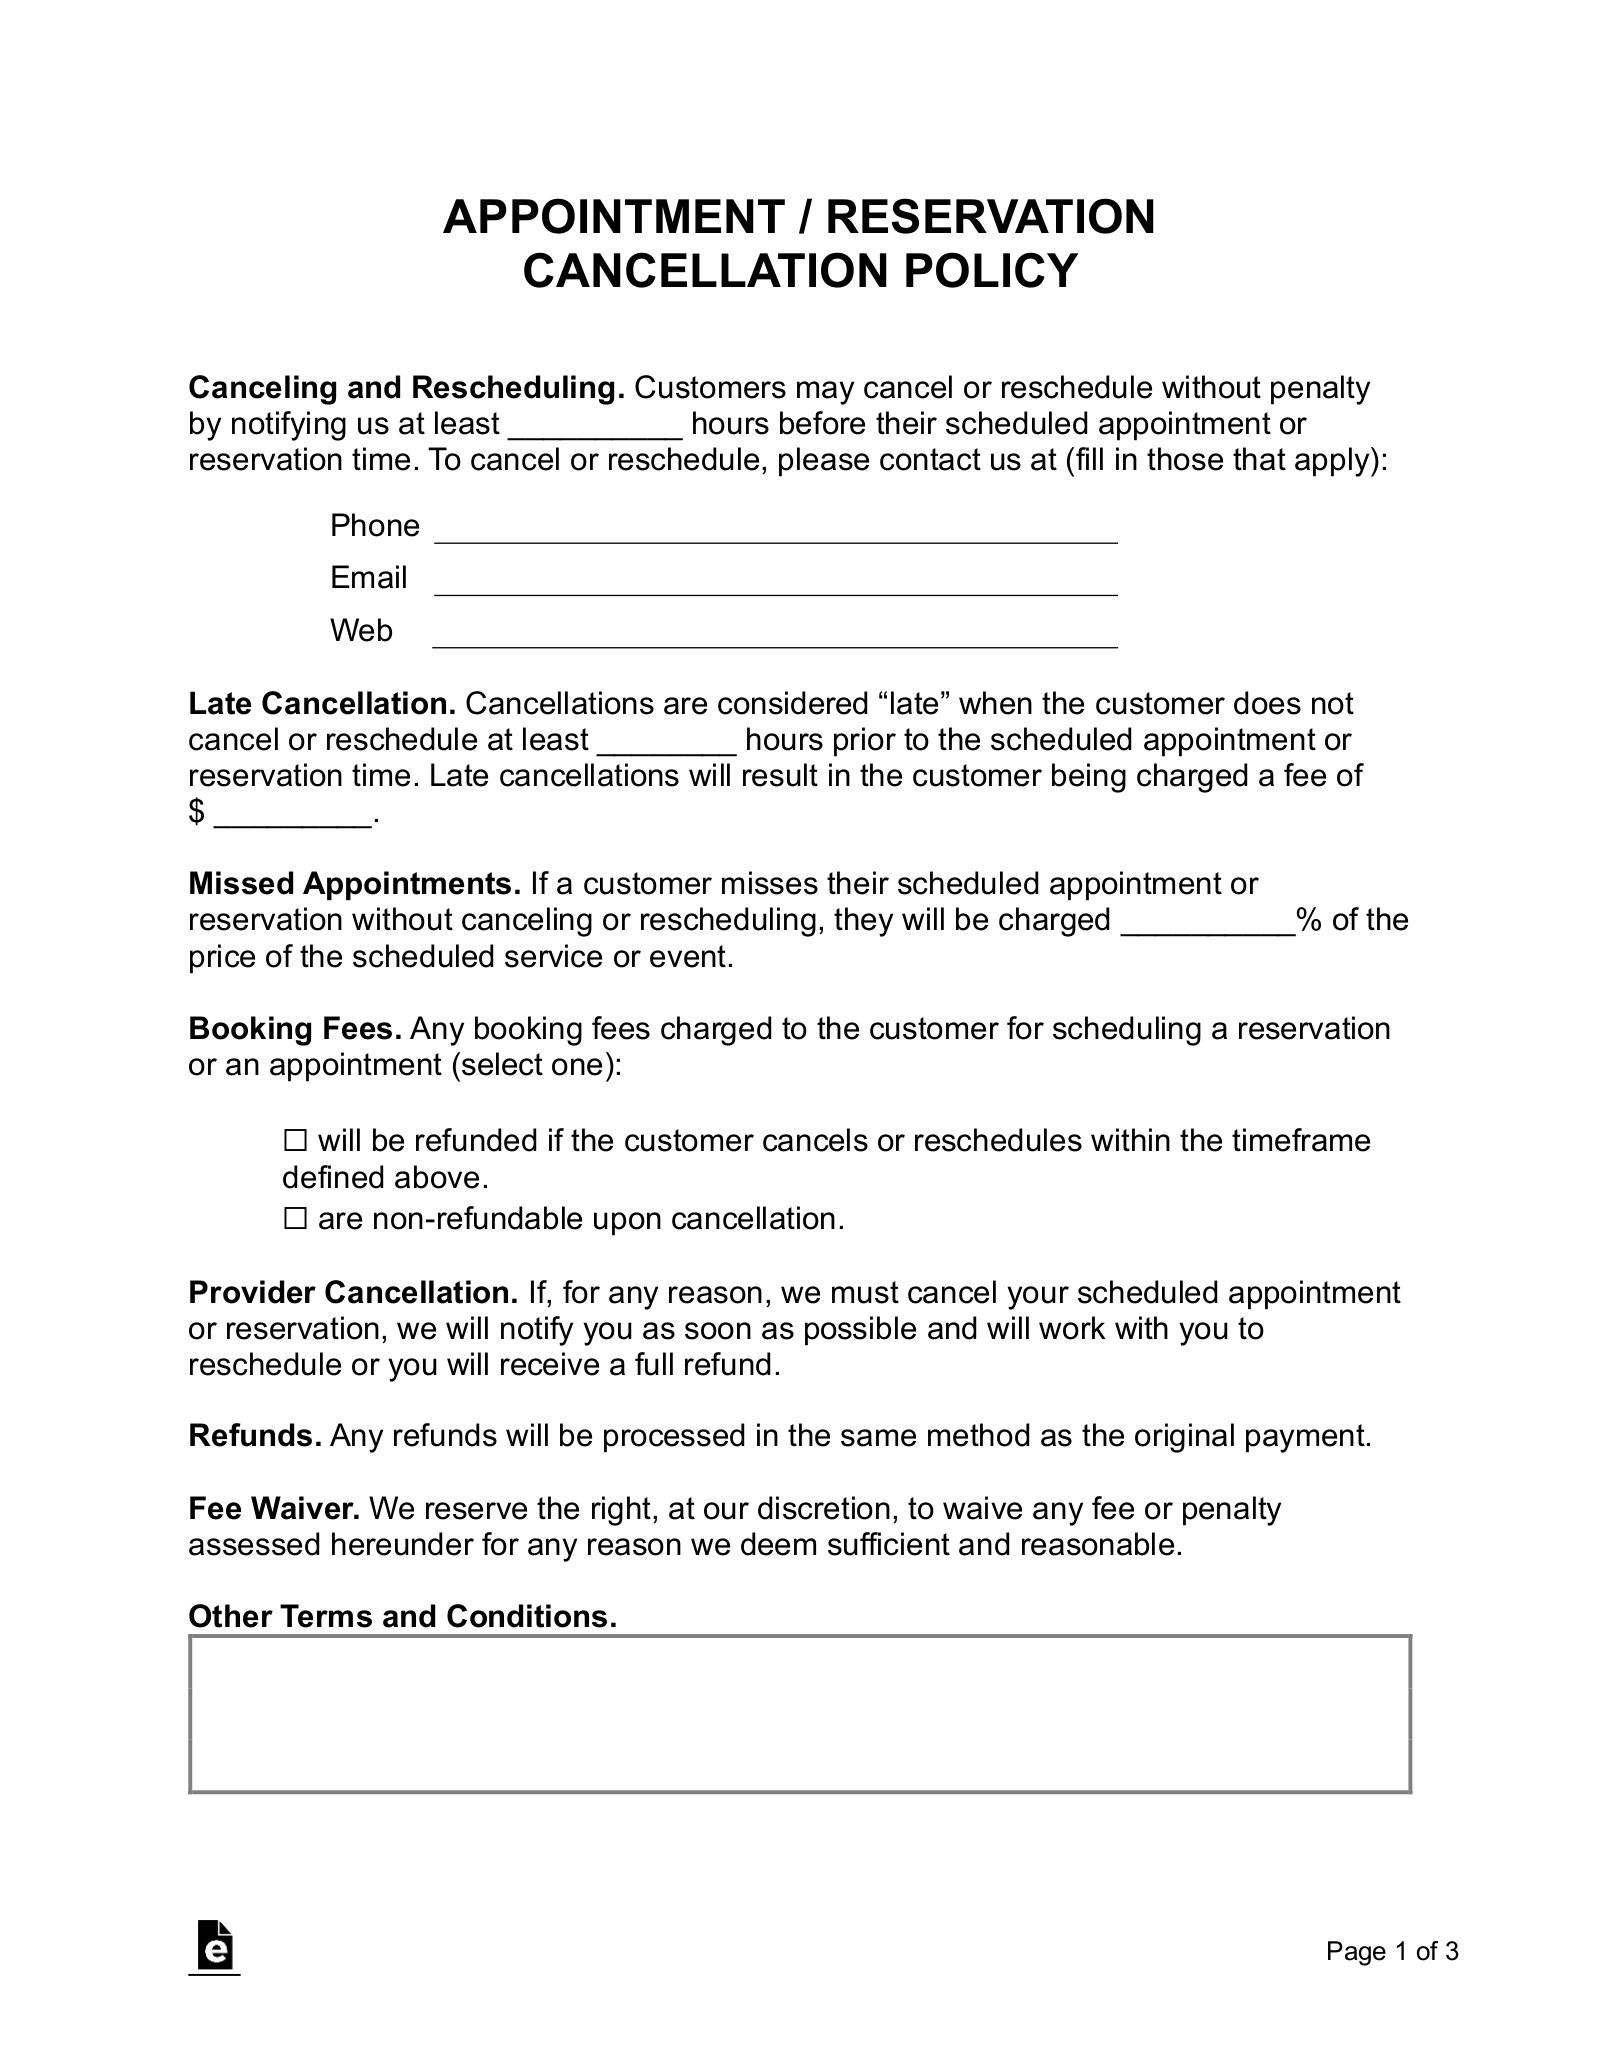 Cancellation Policy 